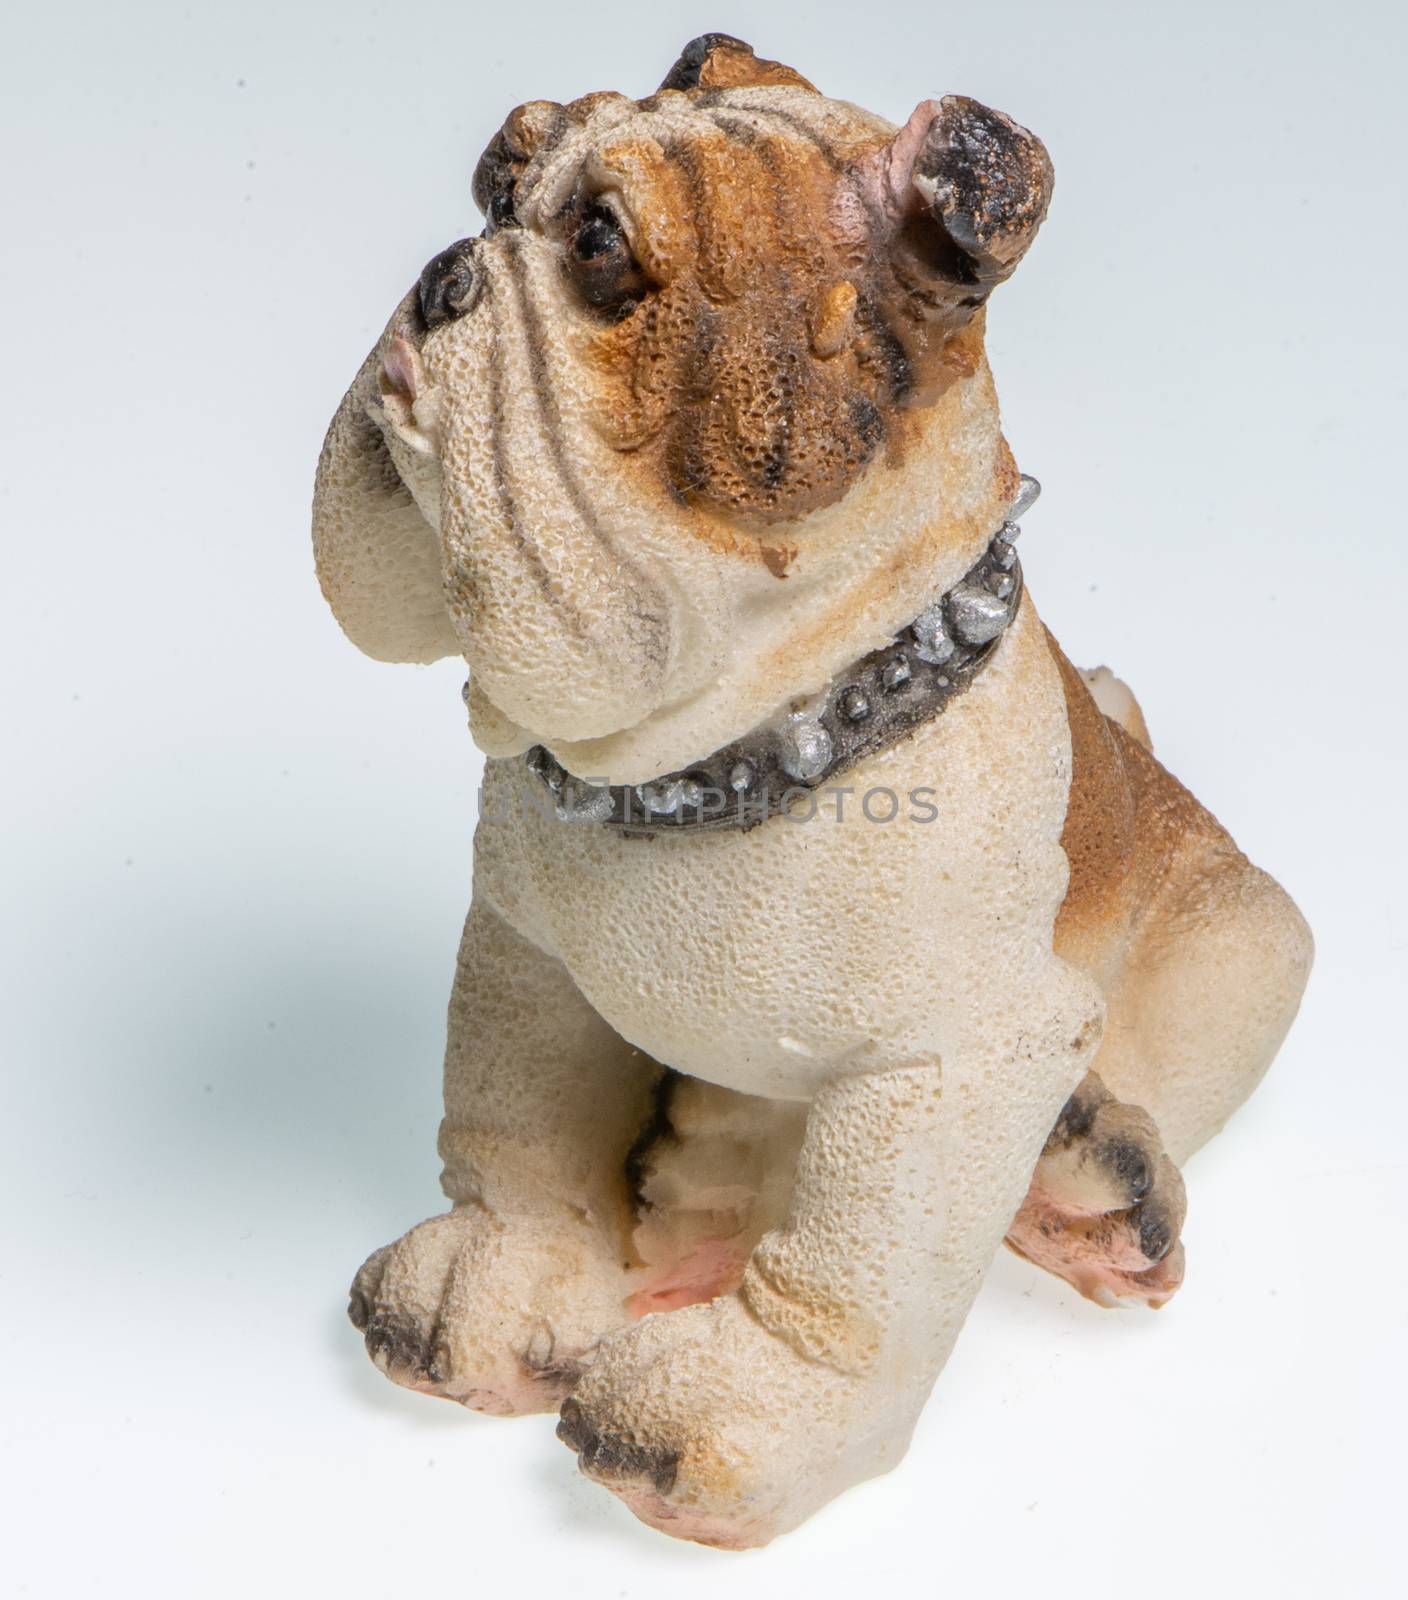 Miniature depicting an English Bulldog breed dog on a white background